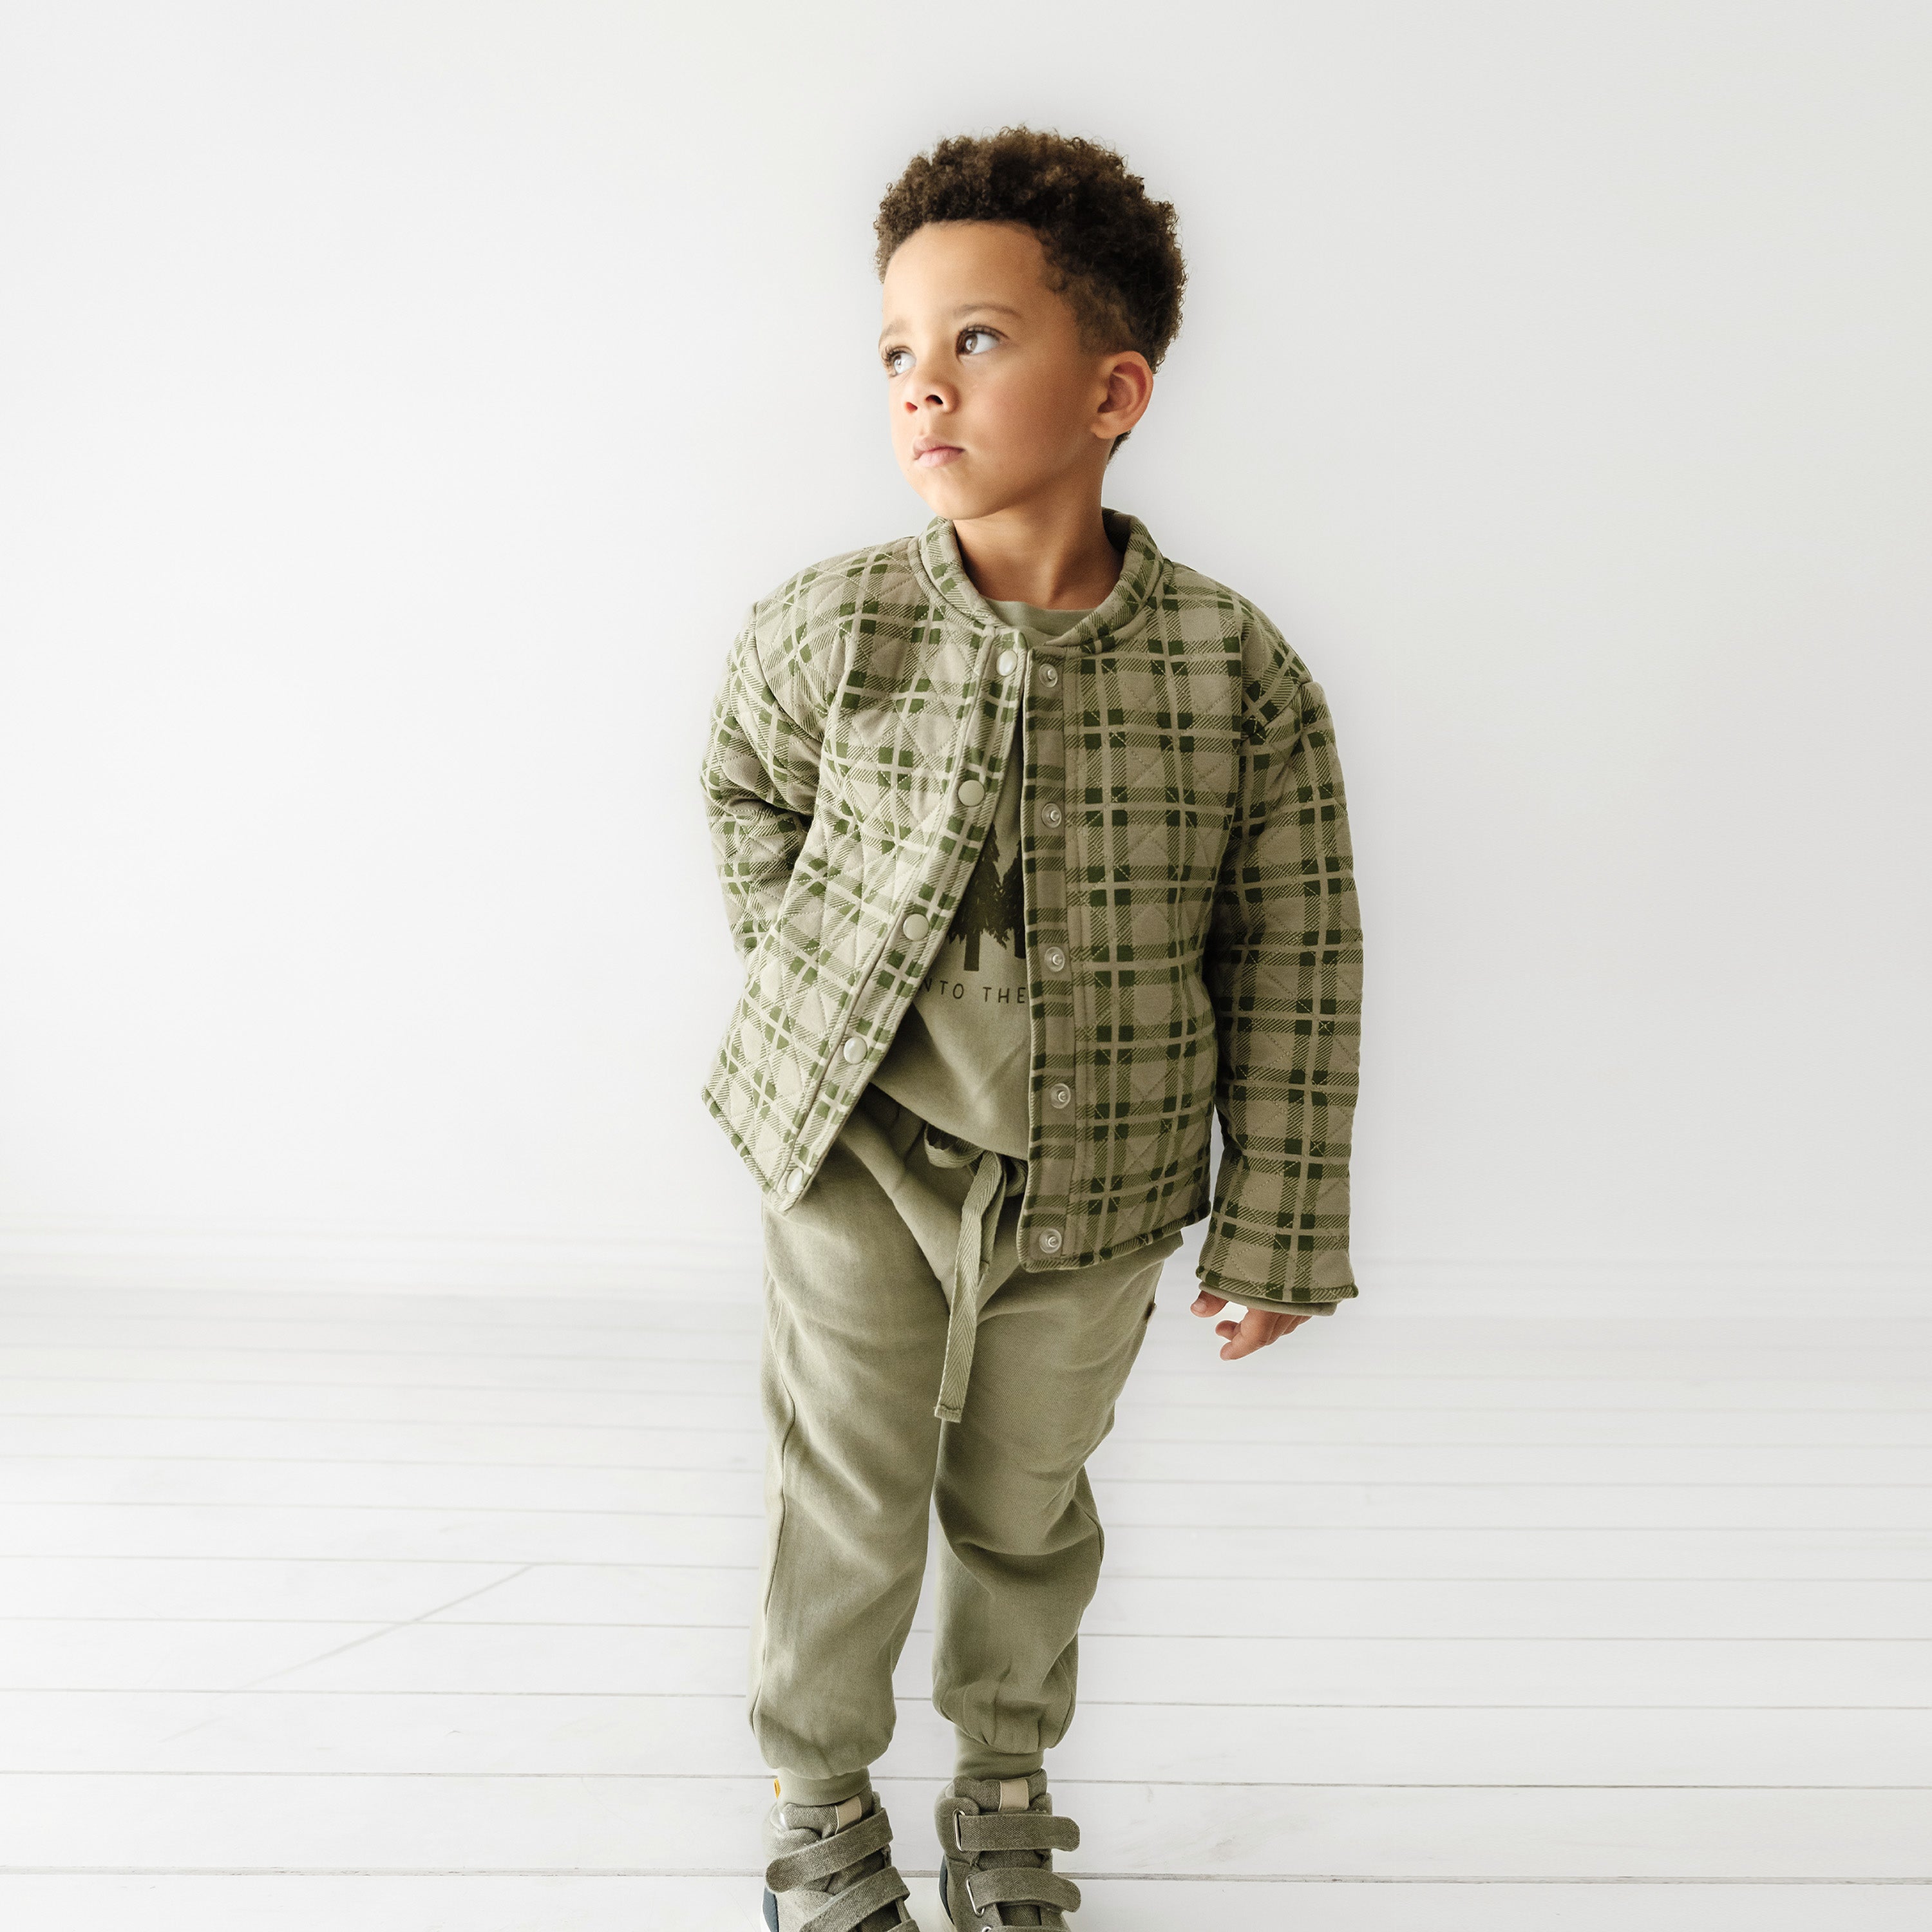 A young boy dressed in a stylish green and brown plaid Organic Merino Wool Buttoned Jacket from Organic Kids, coordinating t-shirt and pants, stands confidently in a white studio setting, looking slightly upwards to his right.